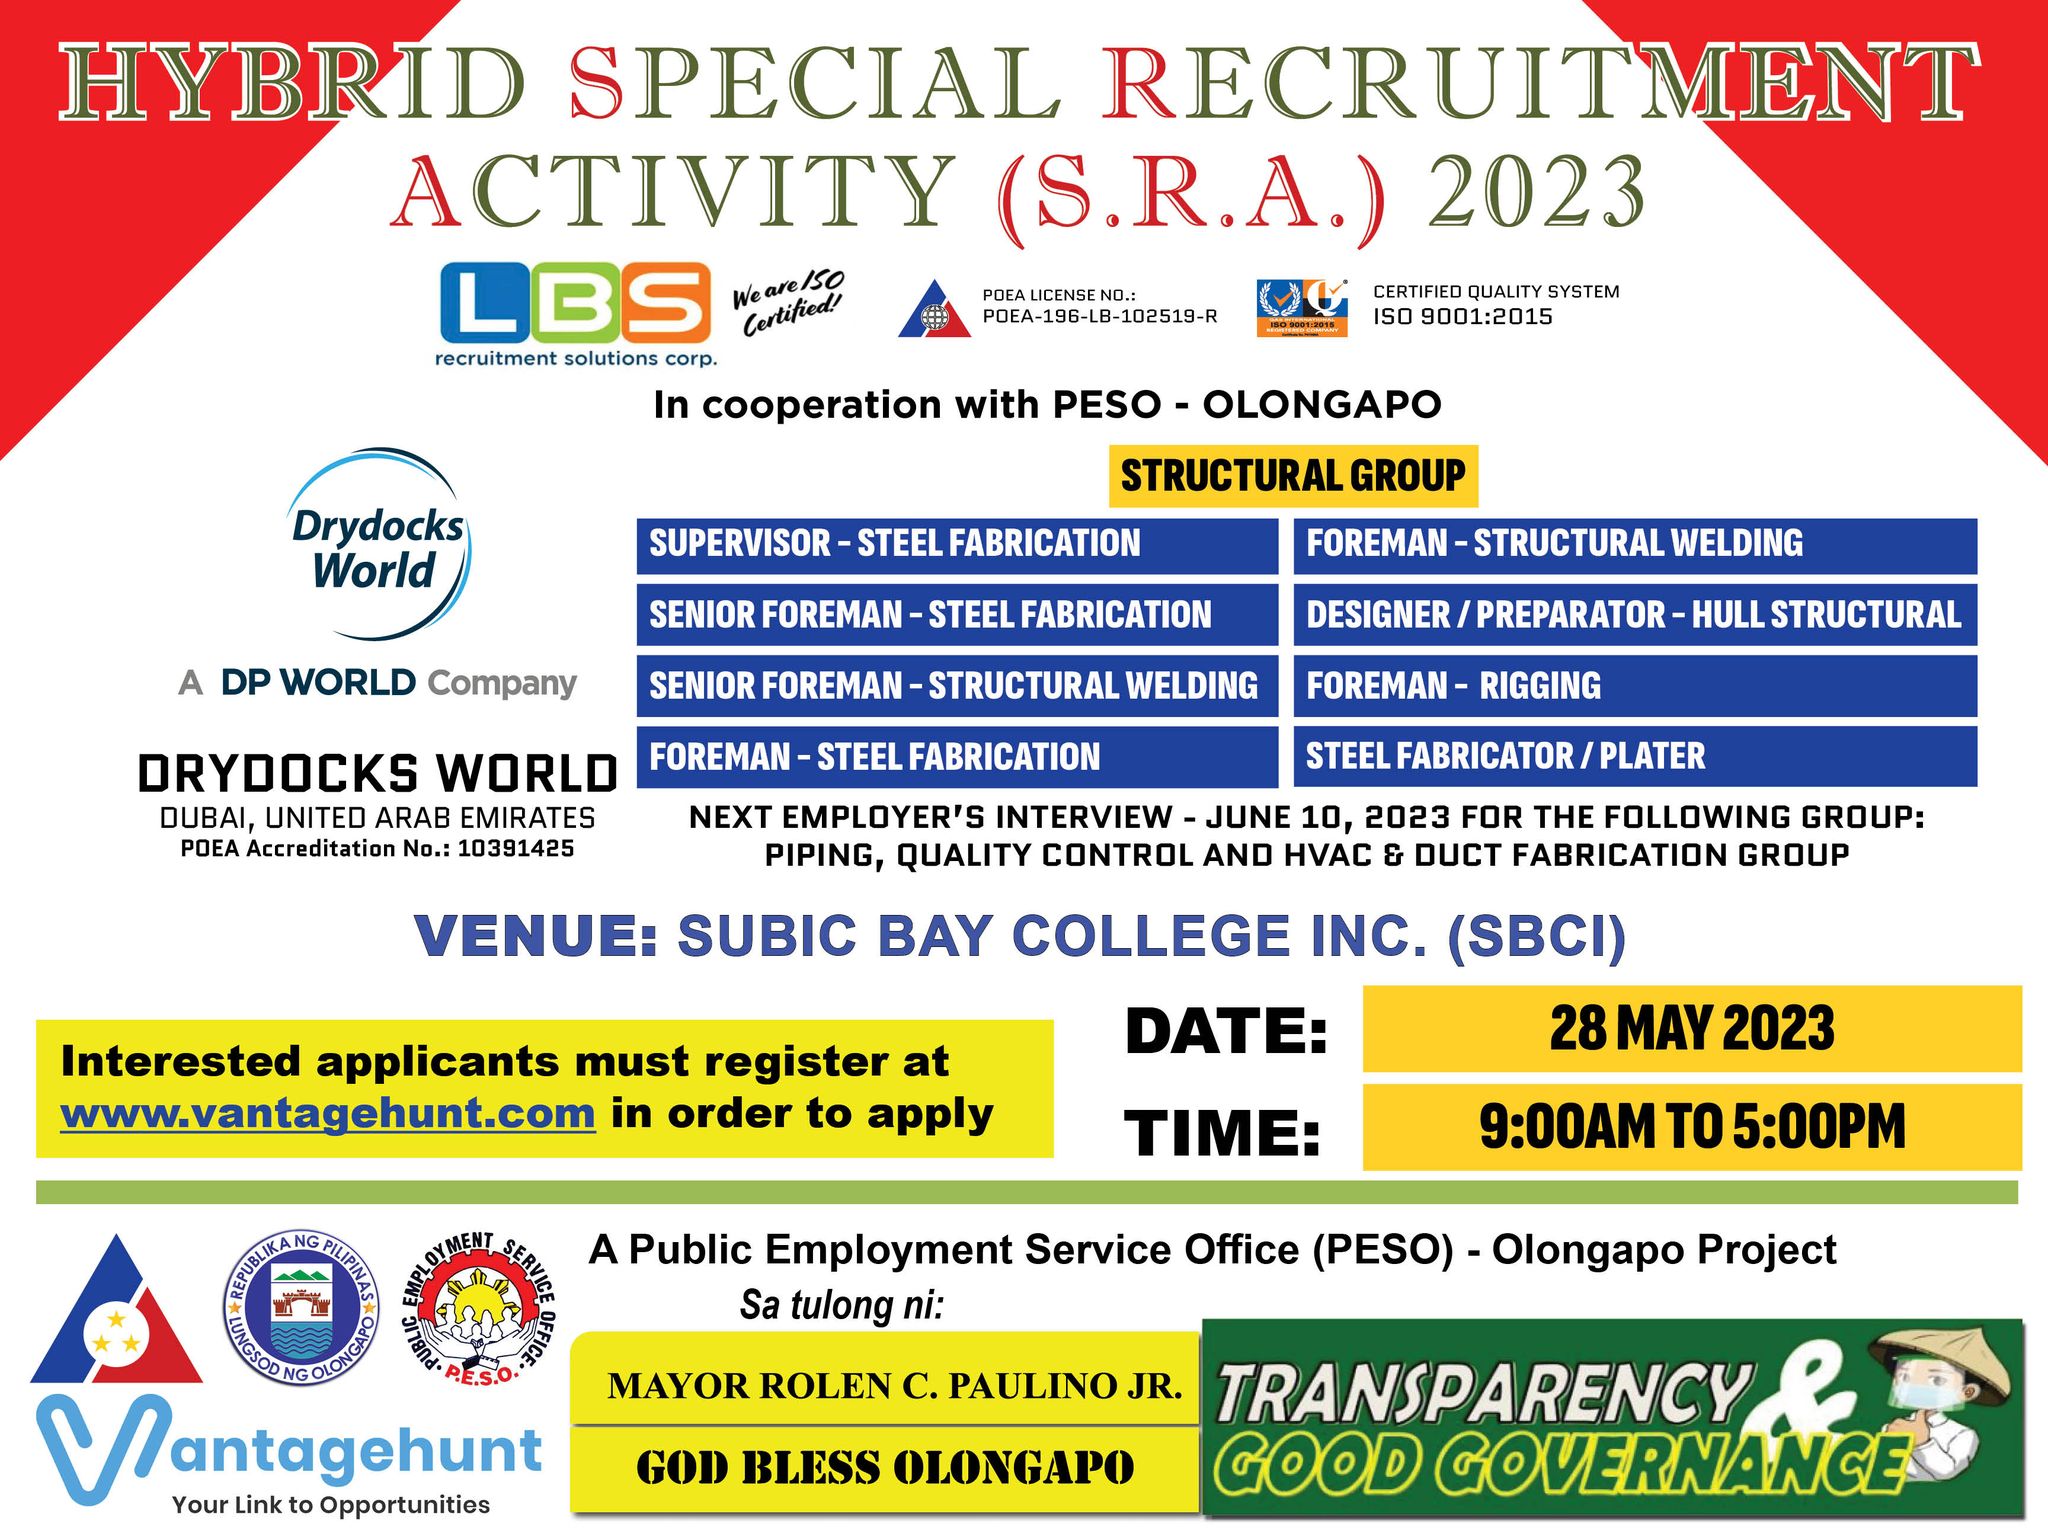 LBS RECRUITMENT SOLUTION -SRA on Site Recruitment With Employer Banner Vantagehunt